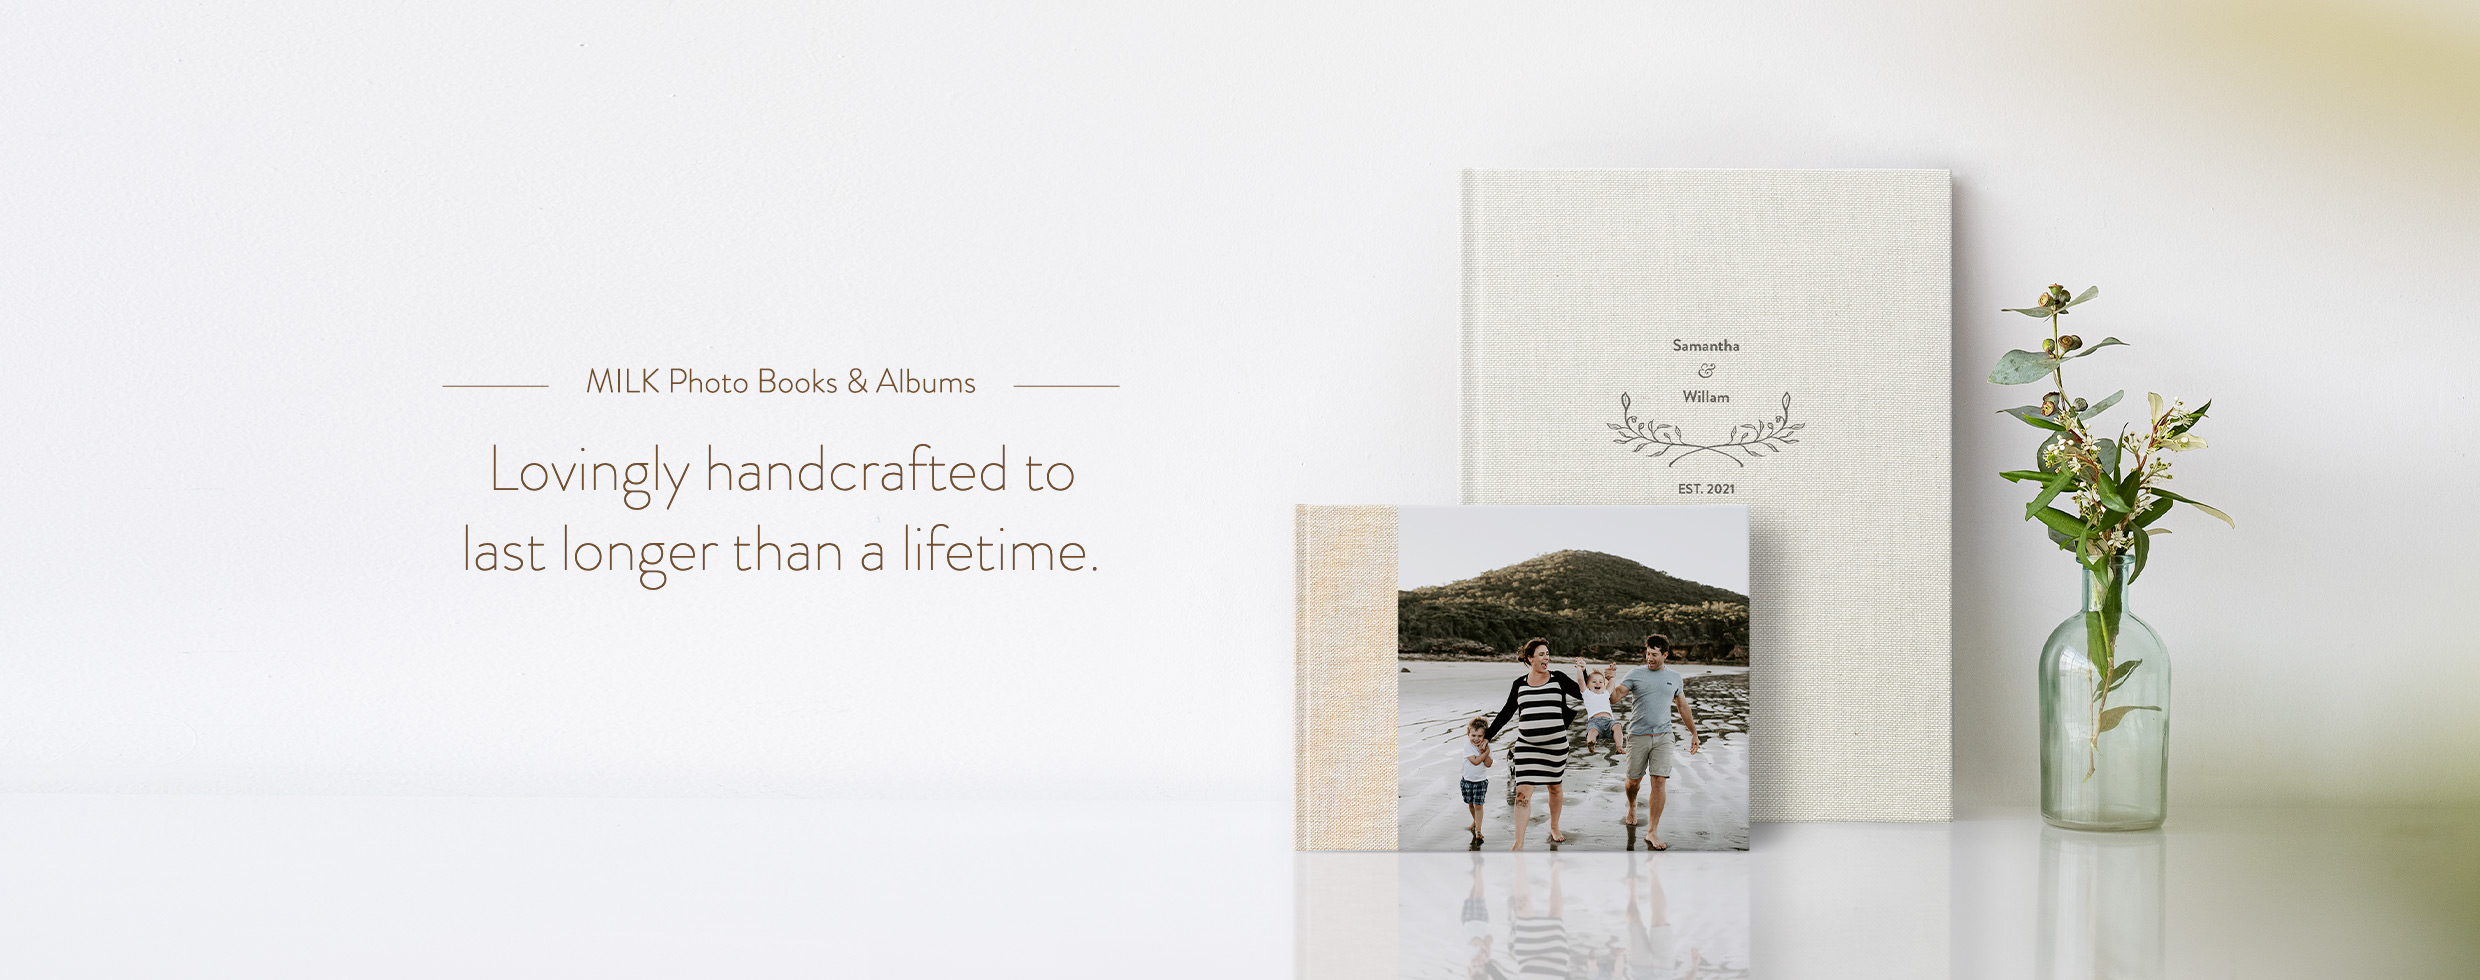 MILK Photo Books & Albums - Lovingly handcrafted to last longer than a lifetime